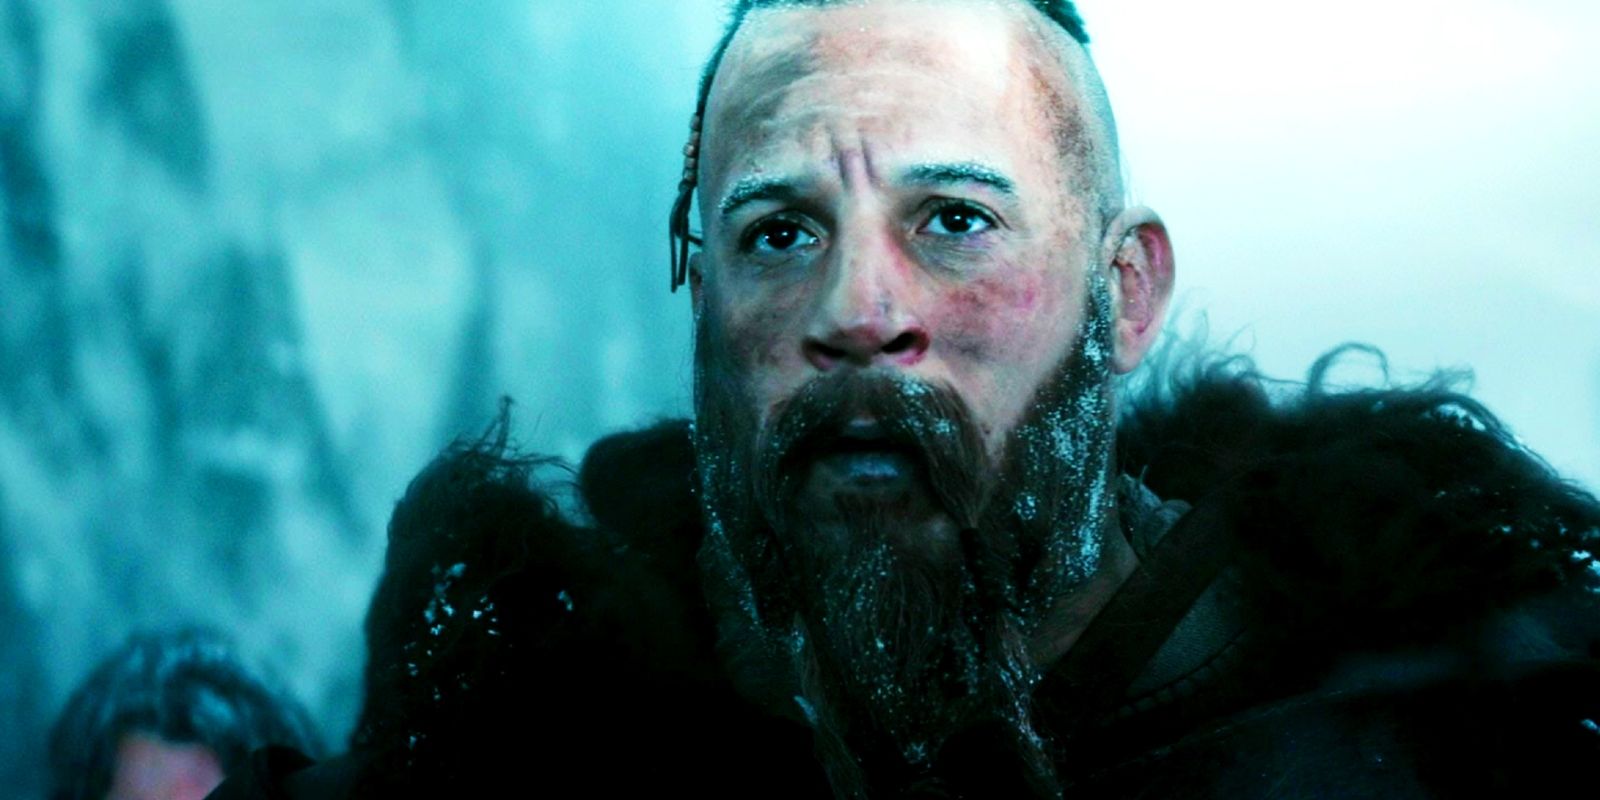 Kaulder looks distressed while walking through the snow in The Last Witch Hunter